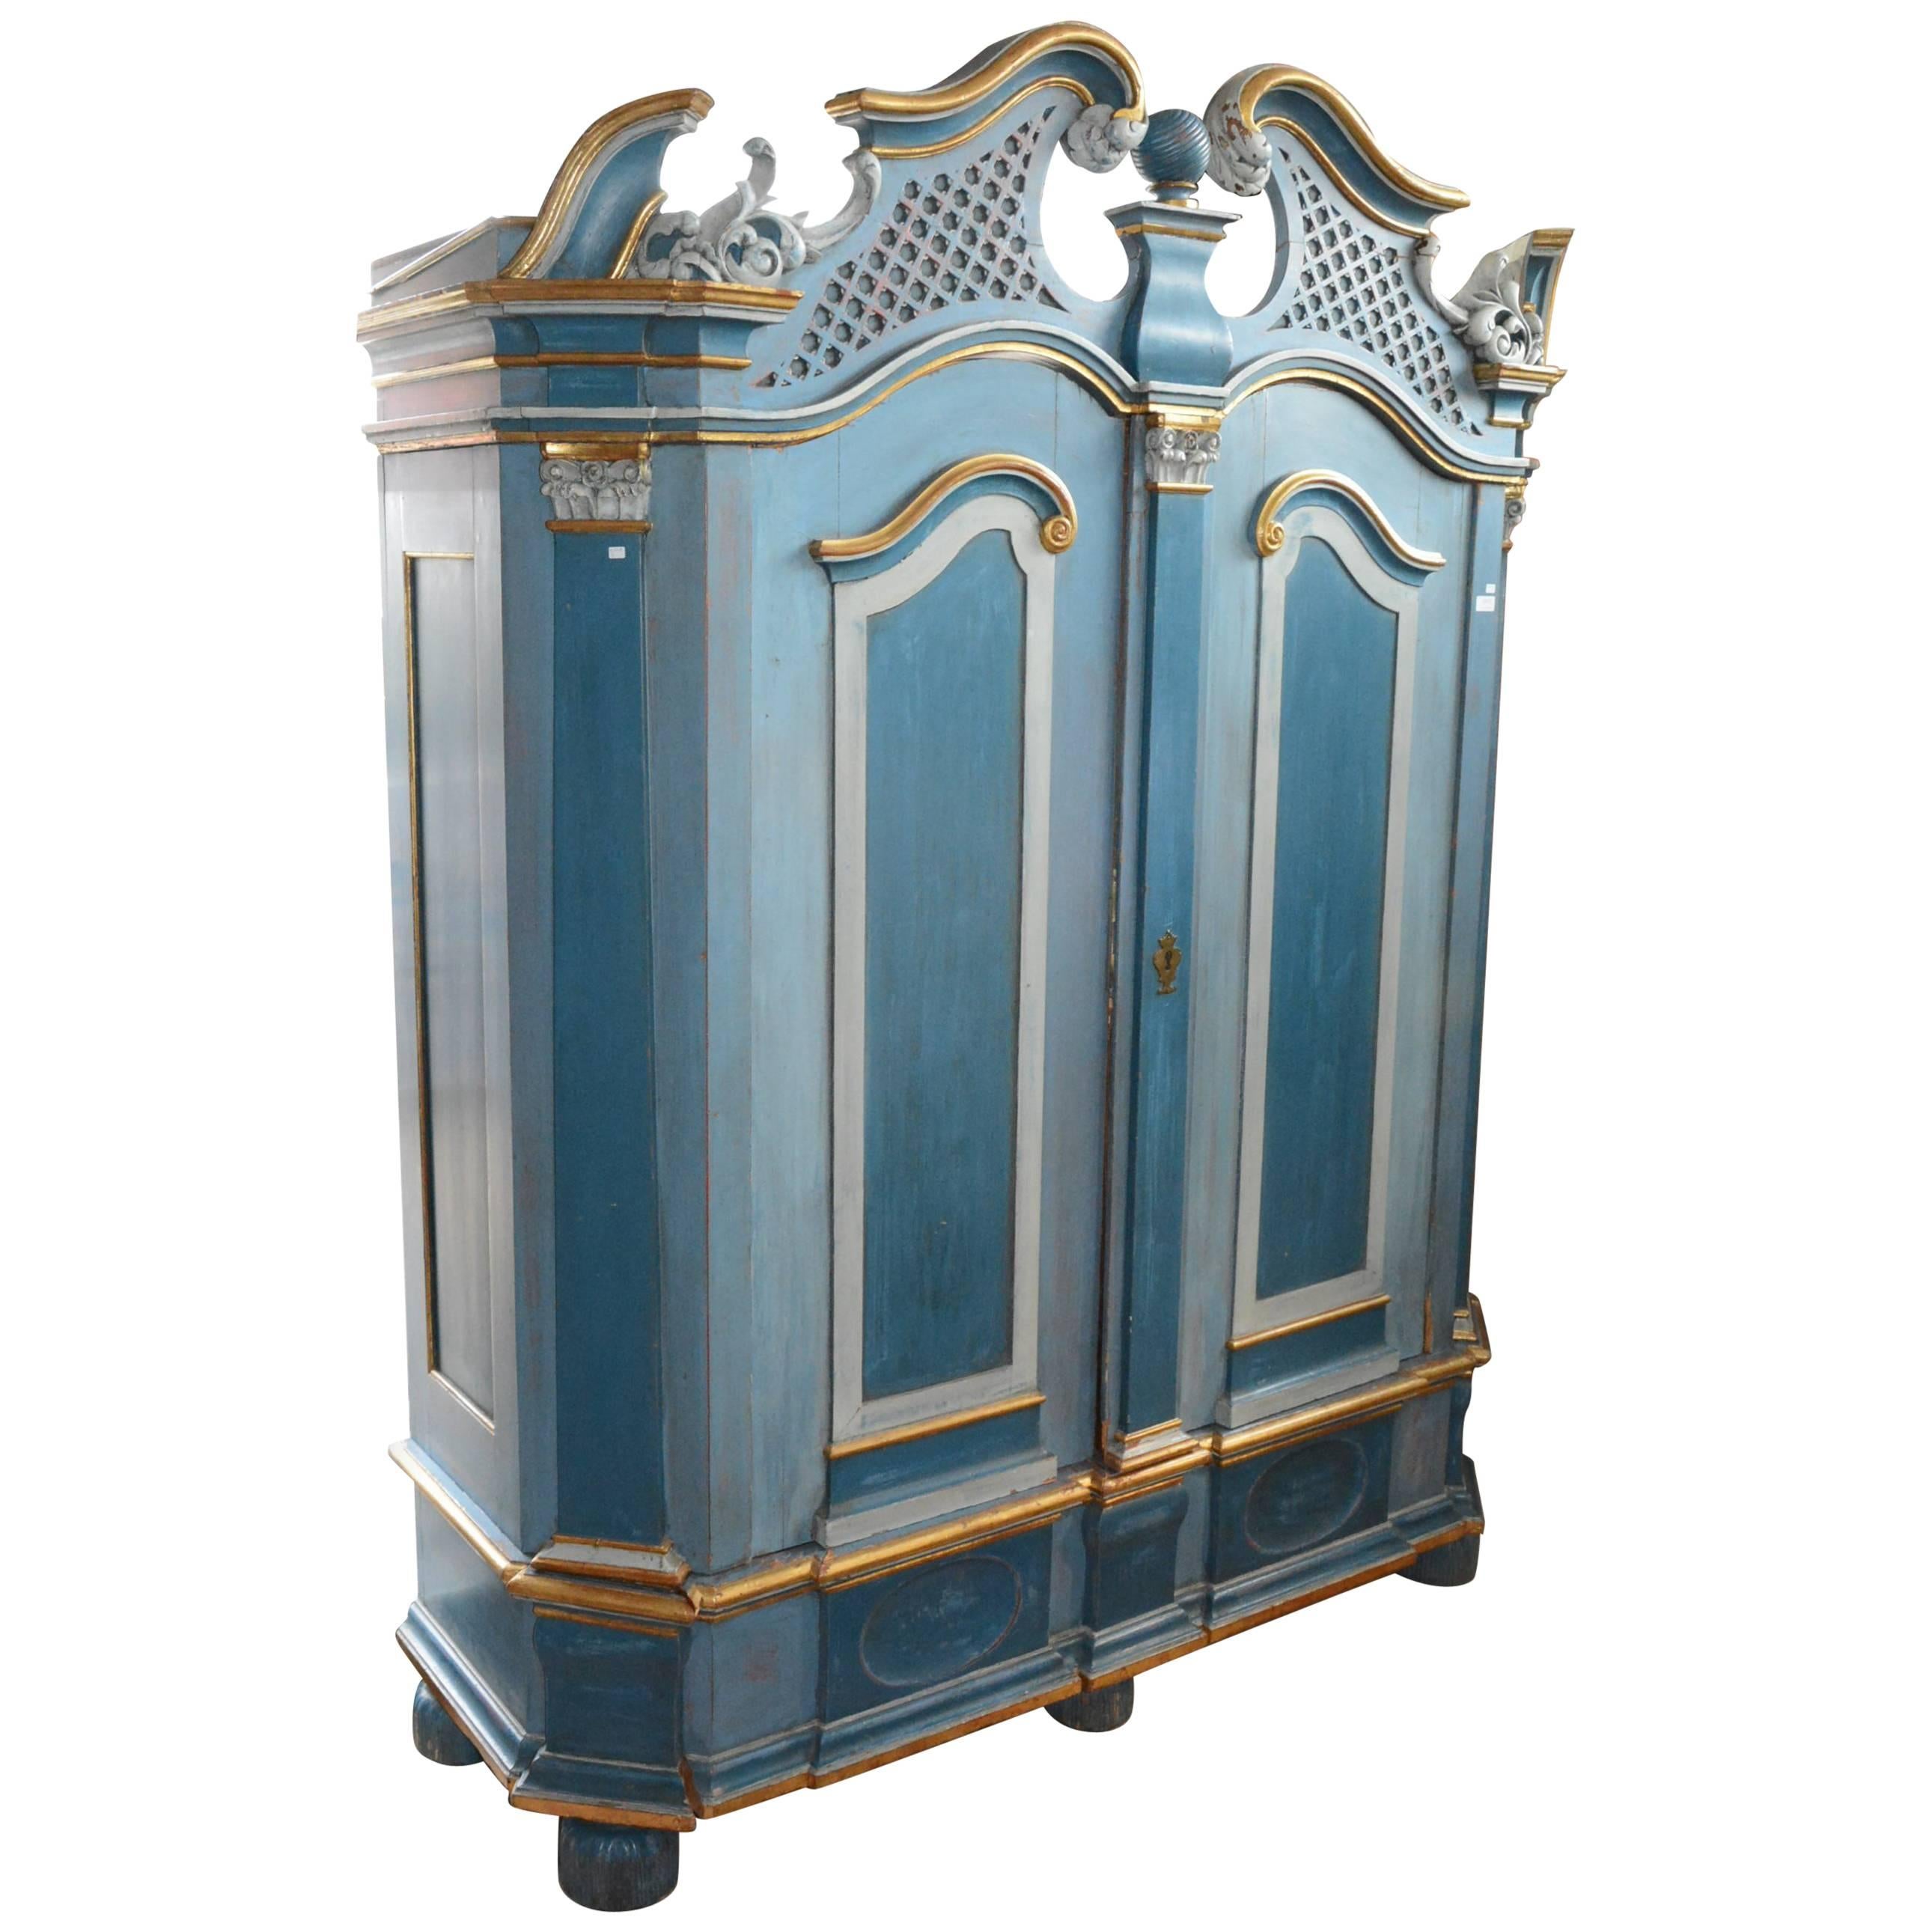 Sculpted Wood Buffet with Blue and Gilt Patina, German or Austrian Work